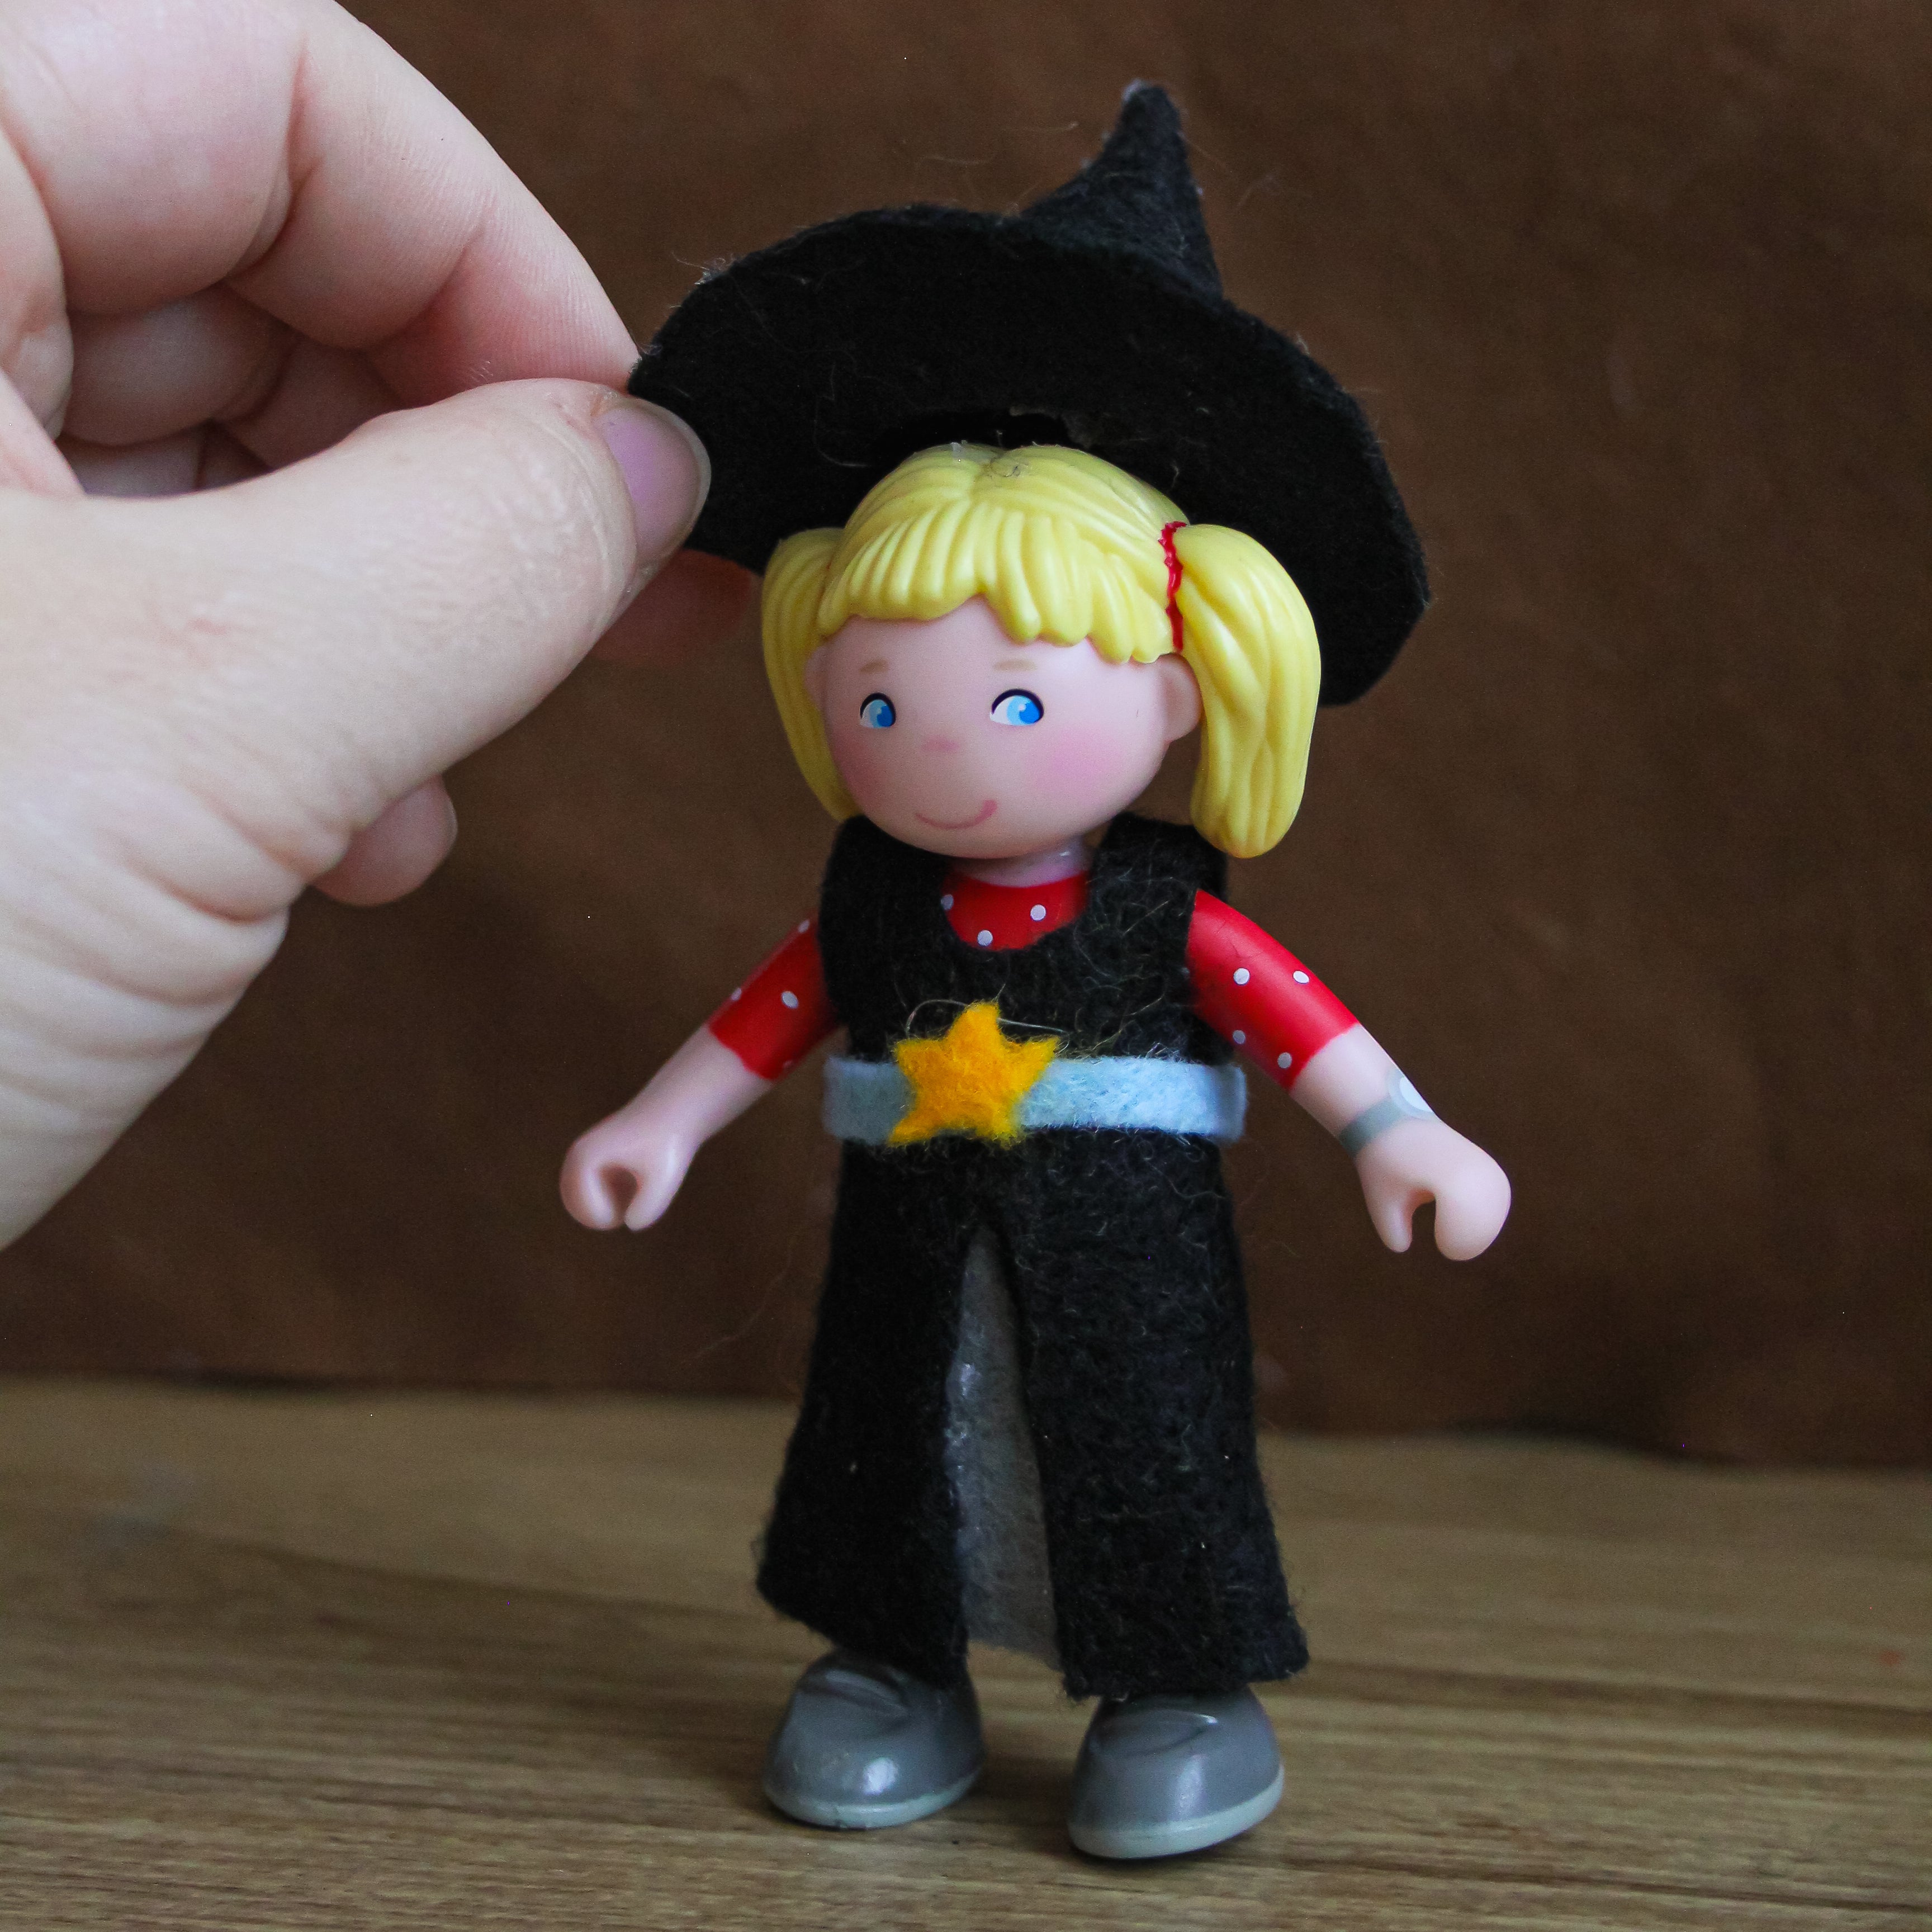 A felt witch costume is being put on a Little Friends Doll.